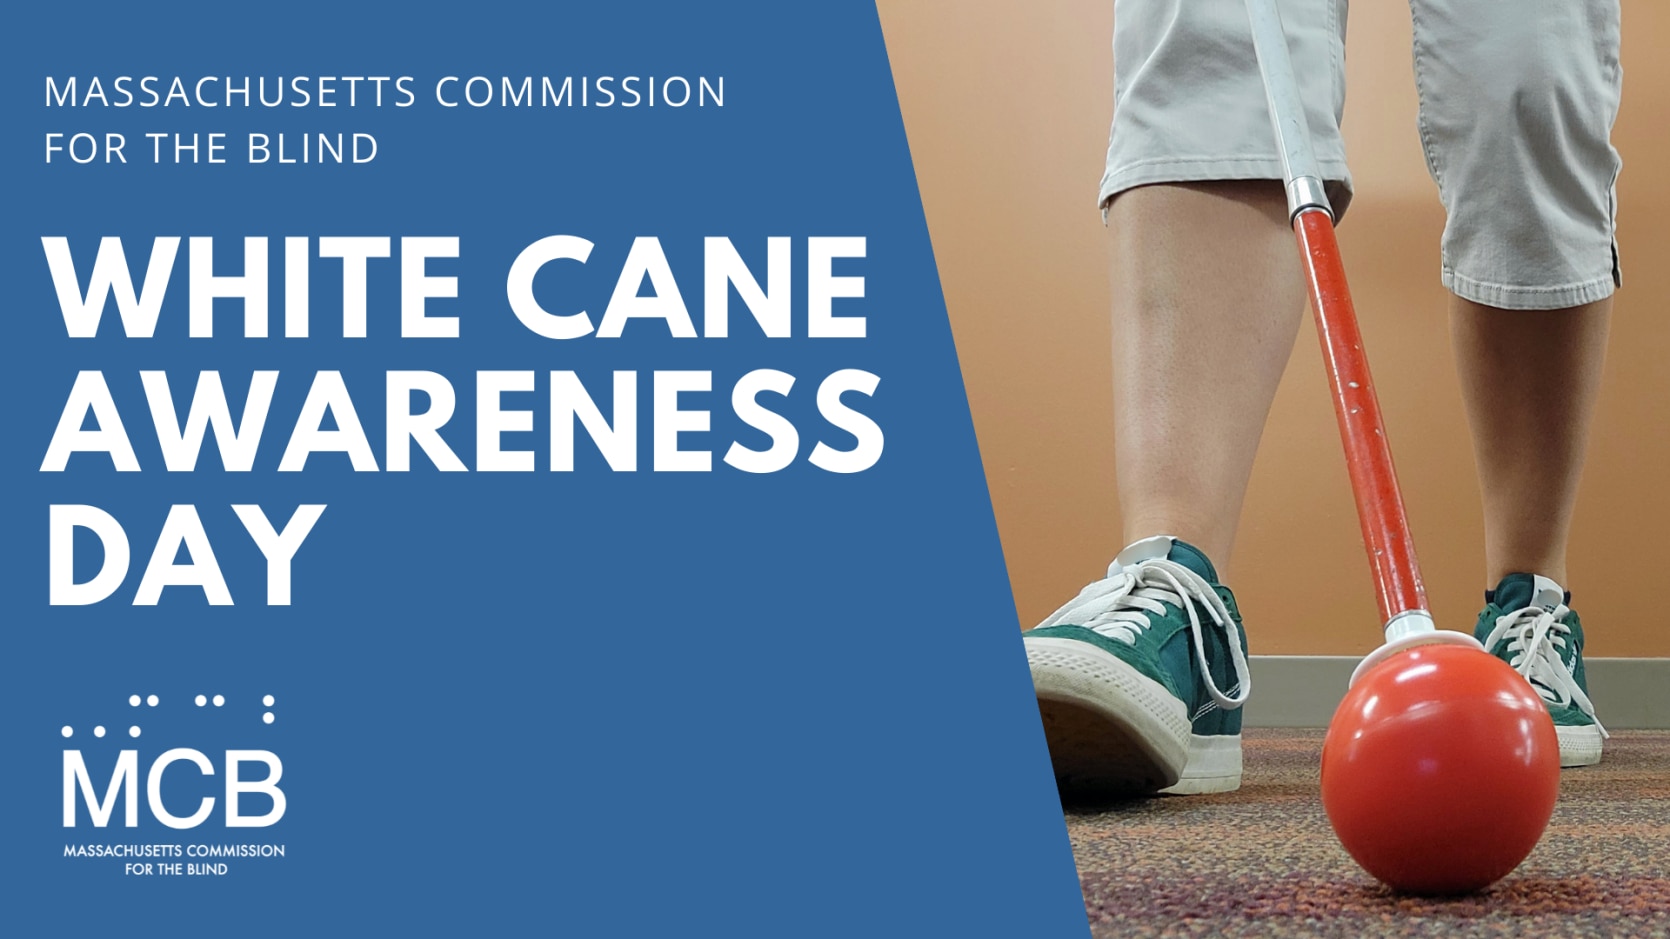 Blue background with Massachusetts Commission for the Blind White Cane Awareness Day MCB logo' and close-up photo of individual in sneakers using white cane to navigate indoors